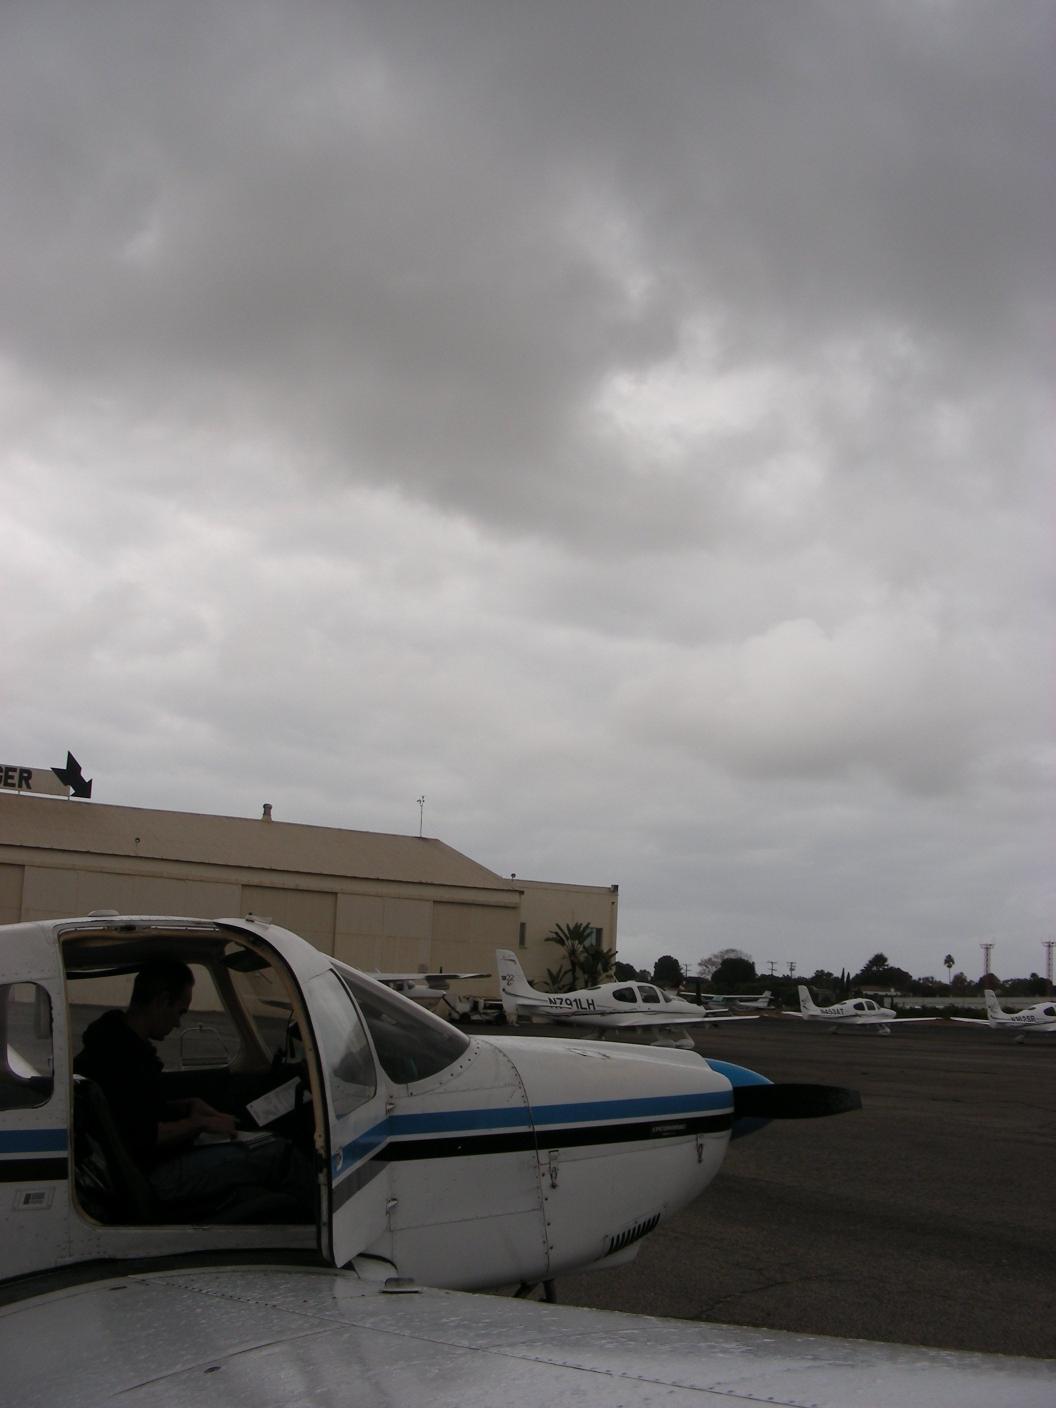 Preparing to depart SMO in the clouds